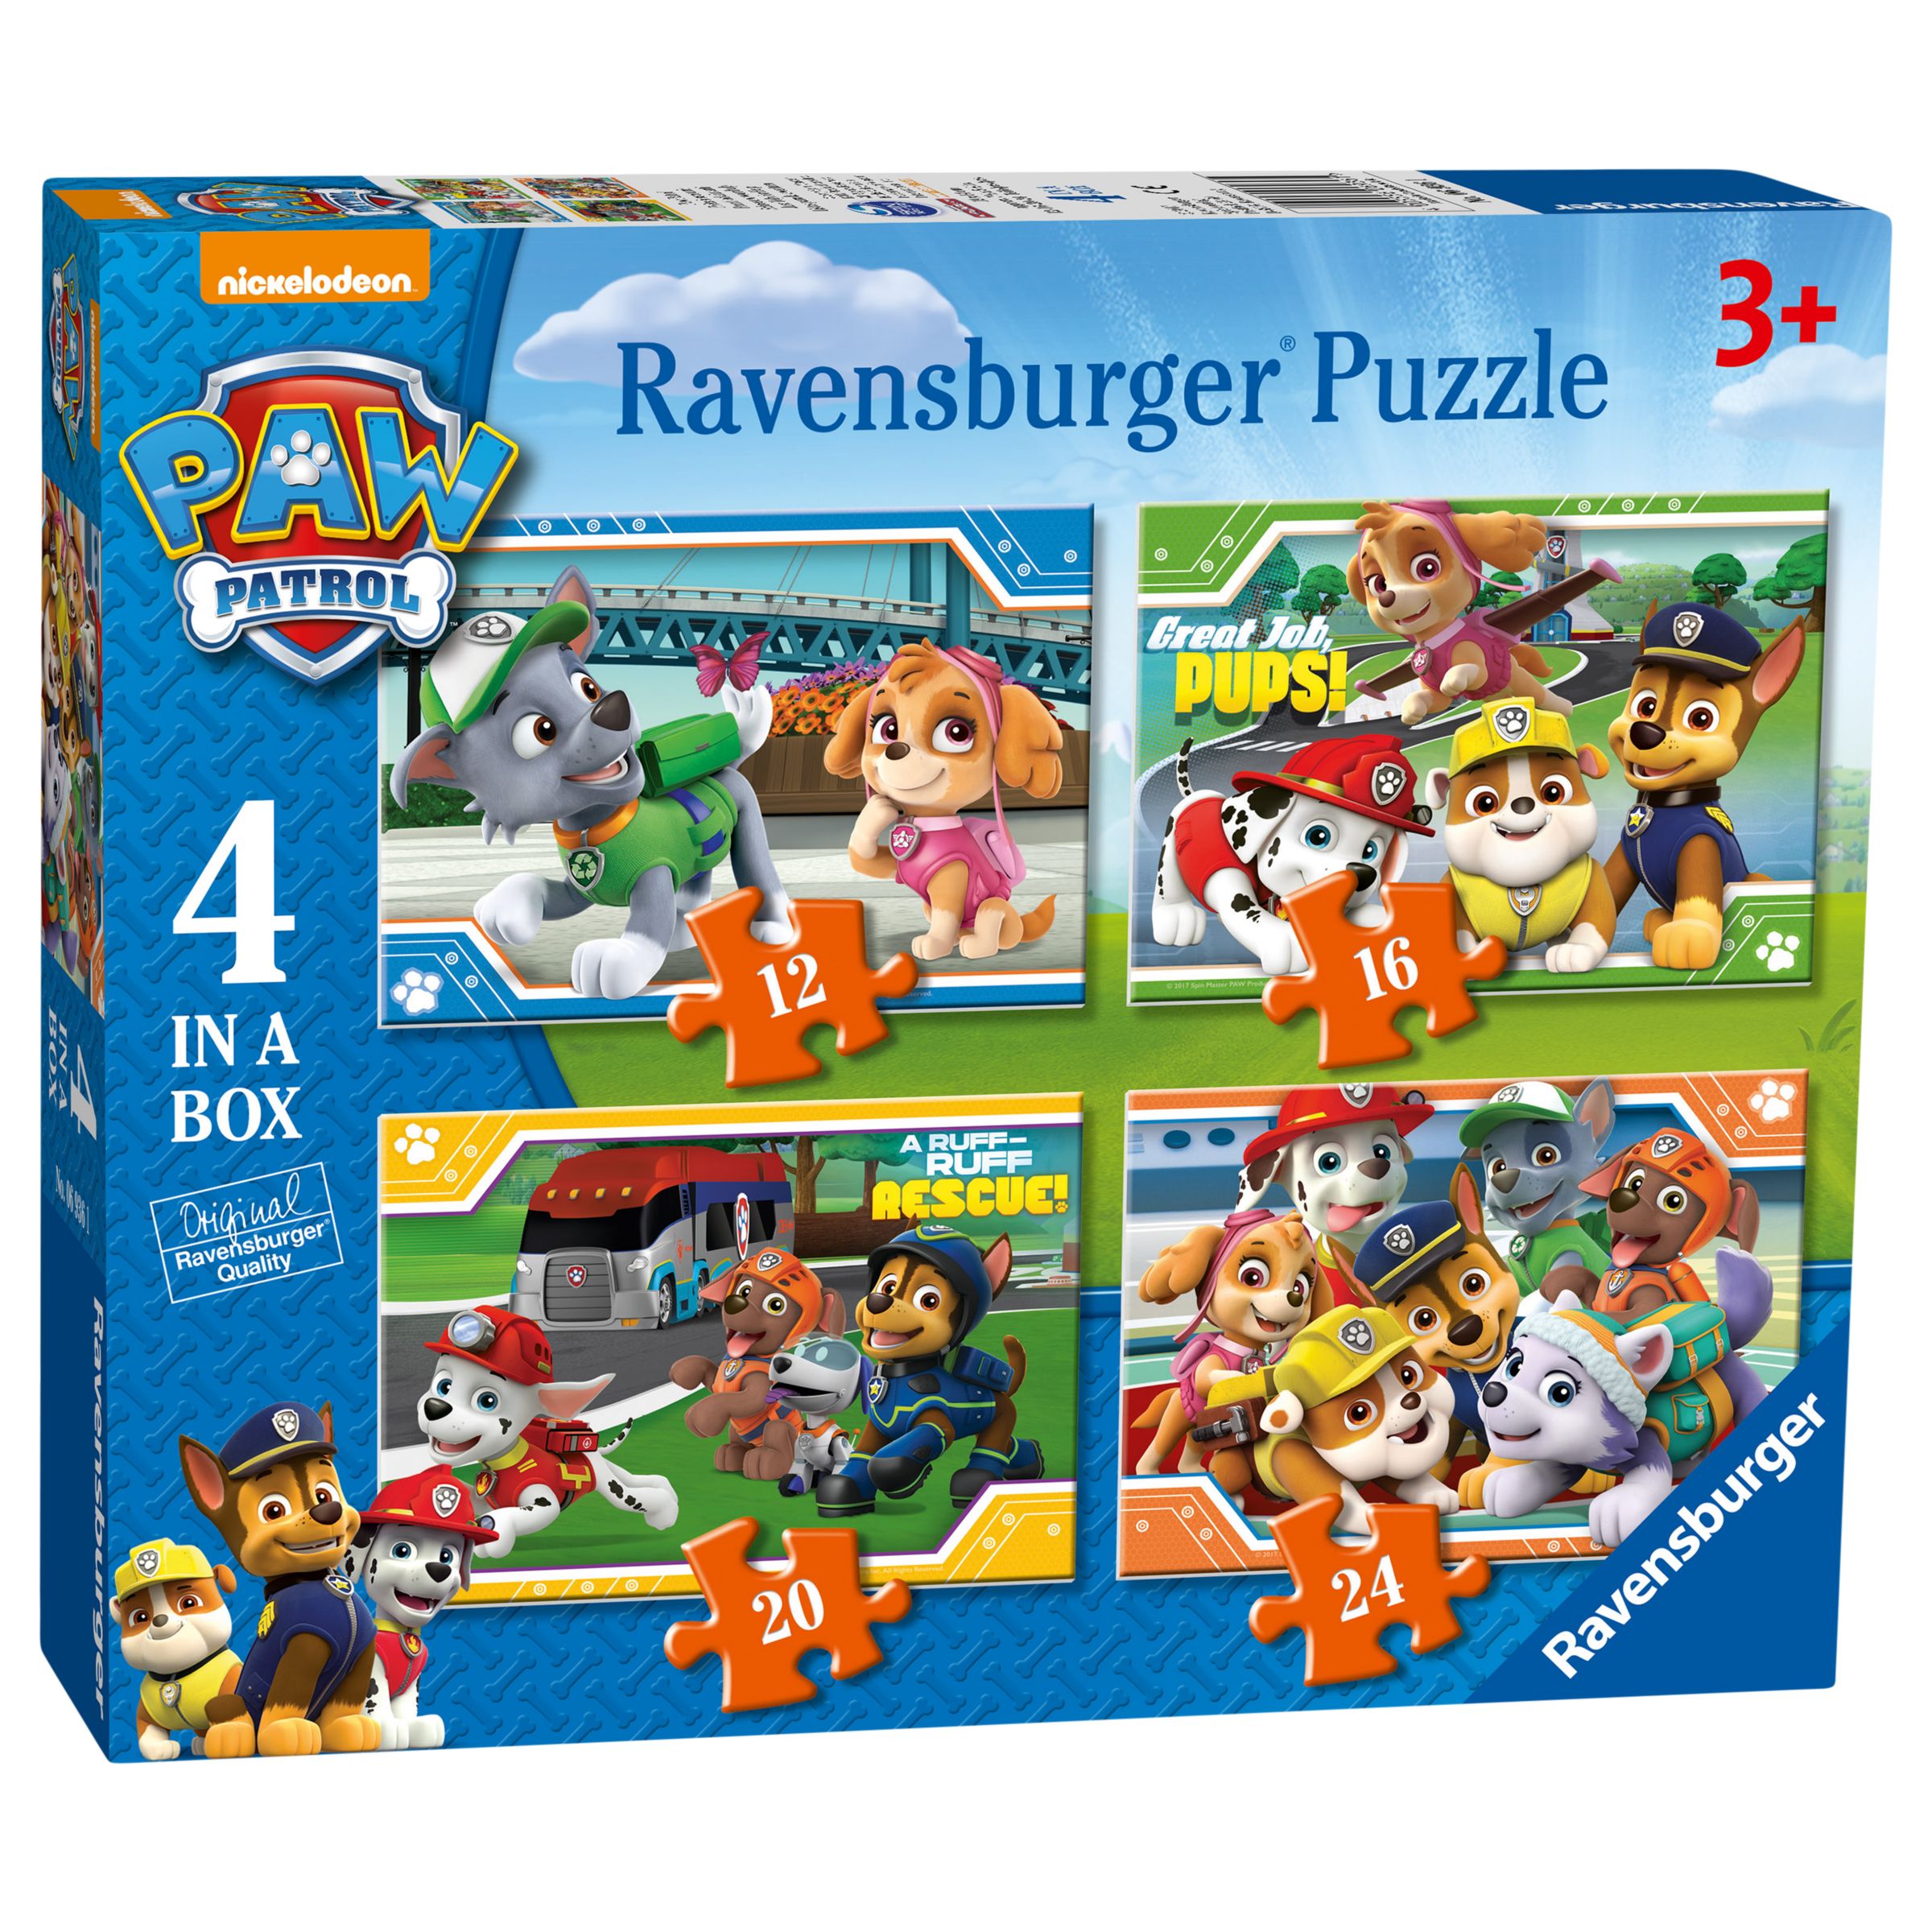 Paw Patrol 4 In a Box Jigsaw Puzzle, 72 Pieces